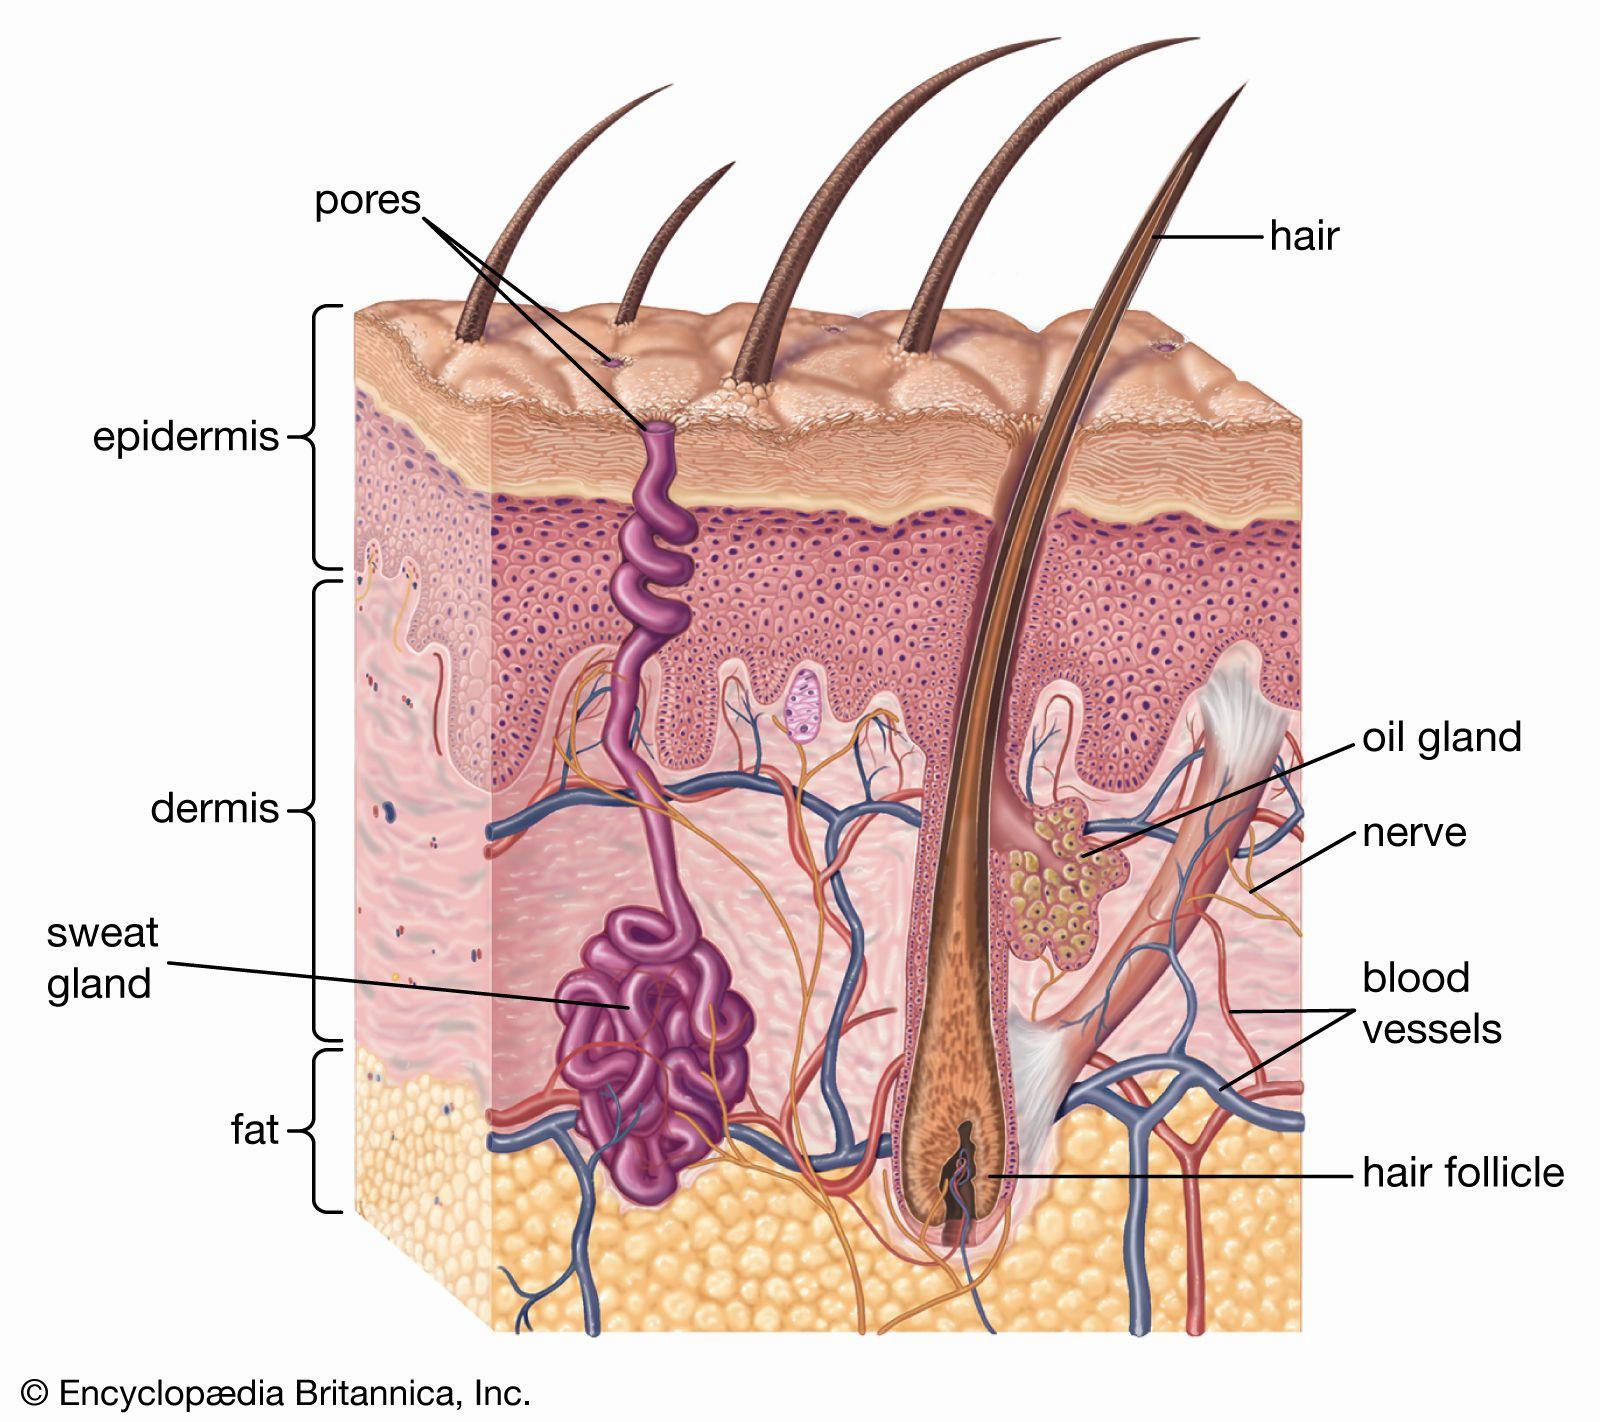 A diagram showing the hair follicle, sweat gland, oil gland, and blood vessels in the dermis layer of the skin, and the hair shaft, pore, and sebaceous gland in the epidermis layer.